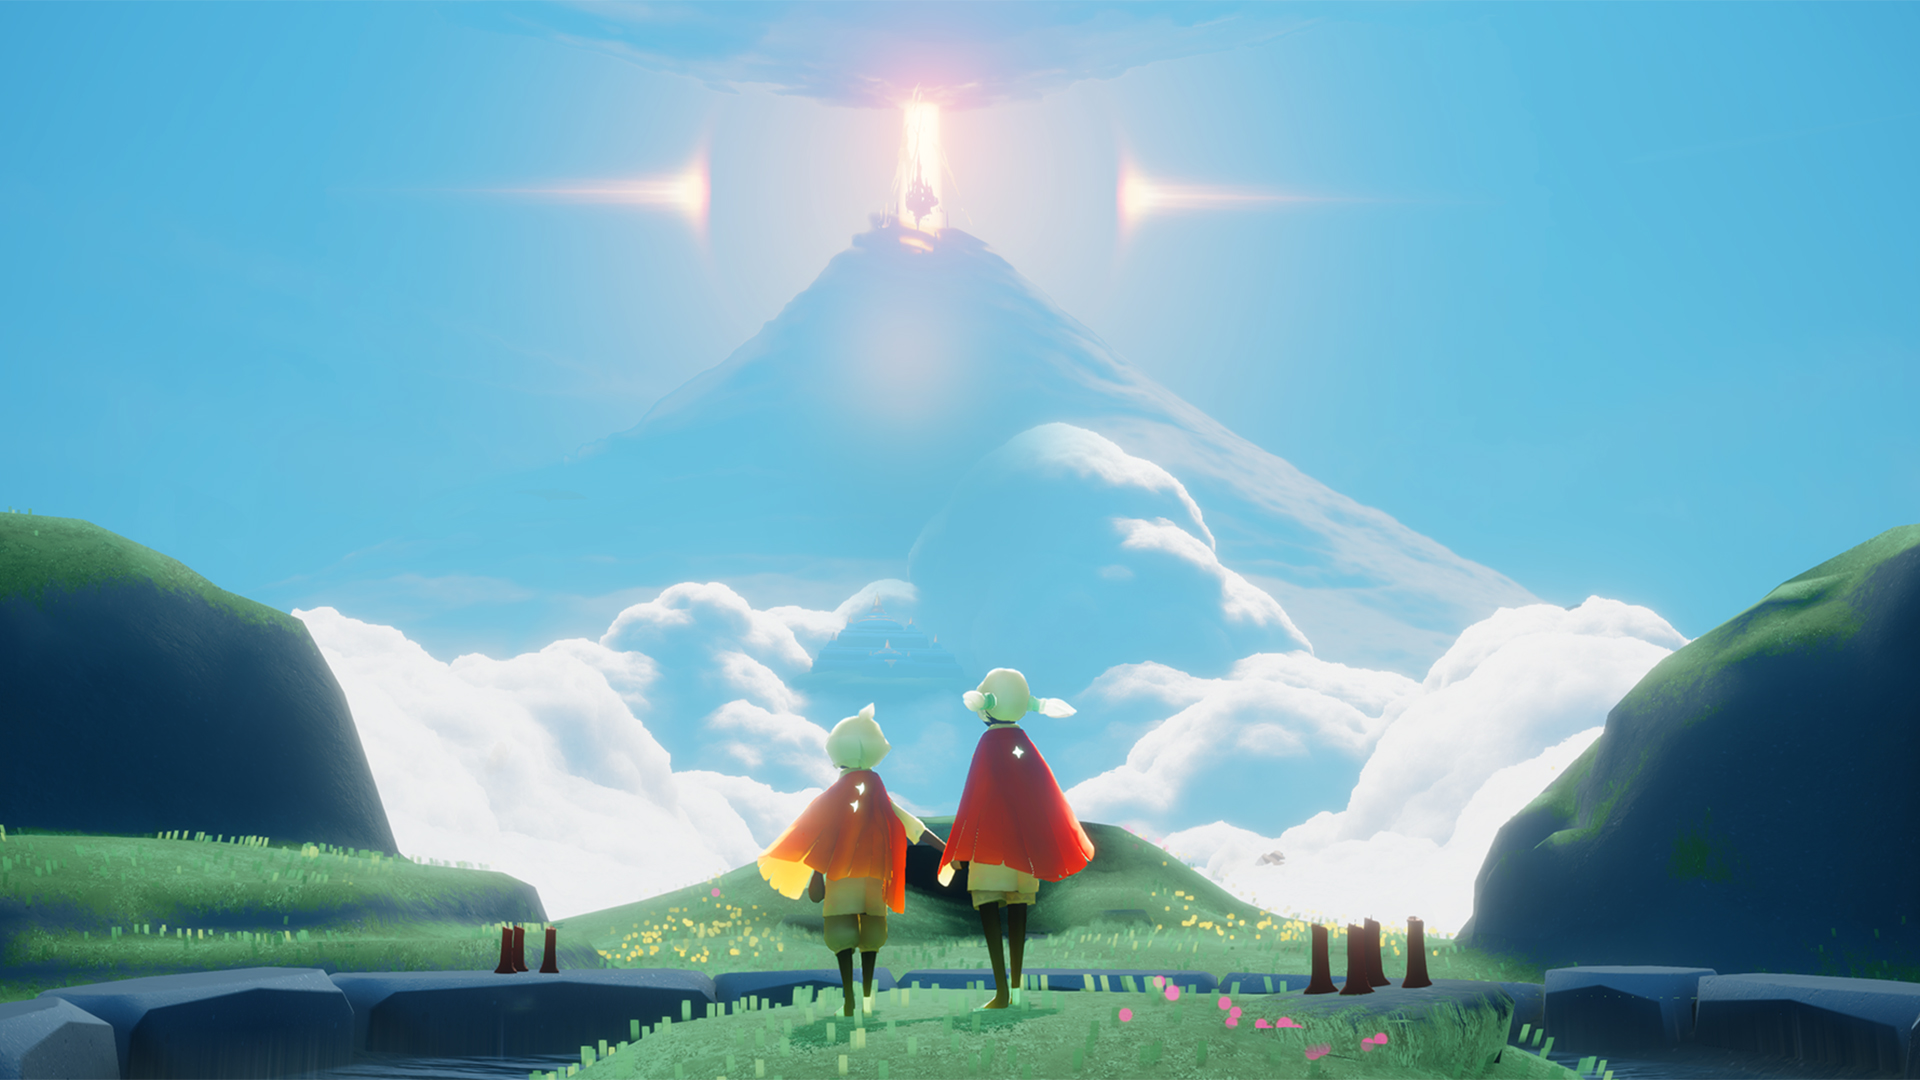 How to Download and Play with Friends Apple’s Game of the Year - Sky: Children of the Light